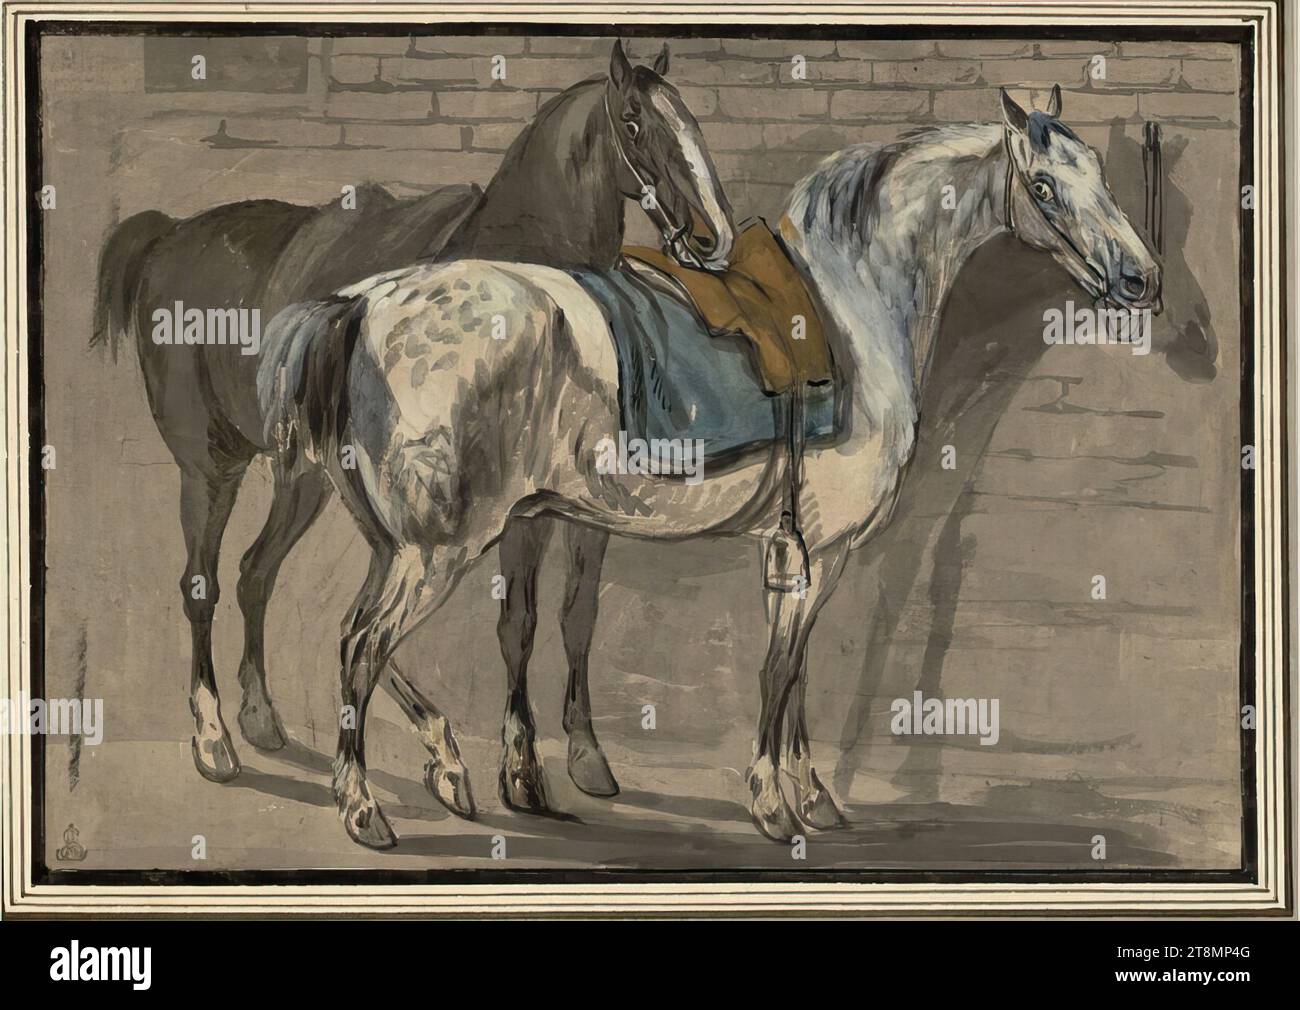 Two saddled and bridled horses by a wall, Conrad Gessner (Zurich 1764 - 1826 Zurich), 1789-96, drawing, brush in black and gray, wash, watercolour, heightened with brush in white, over traces of black chalk, on light brown paper, 14.3 x 20.4 cm, l.l. Duke Albert of Saxe-Teschen Stock Photo